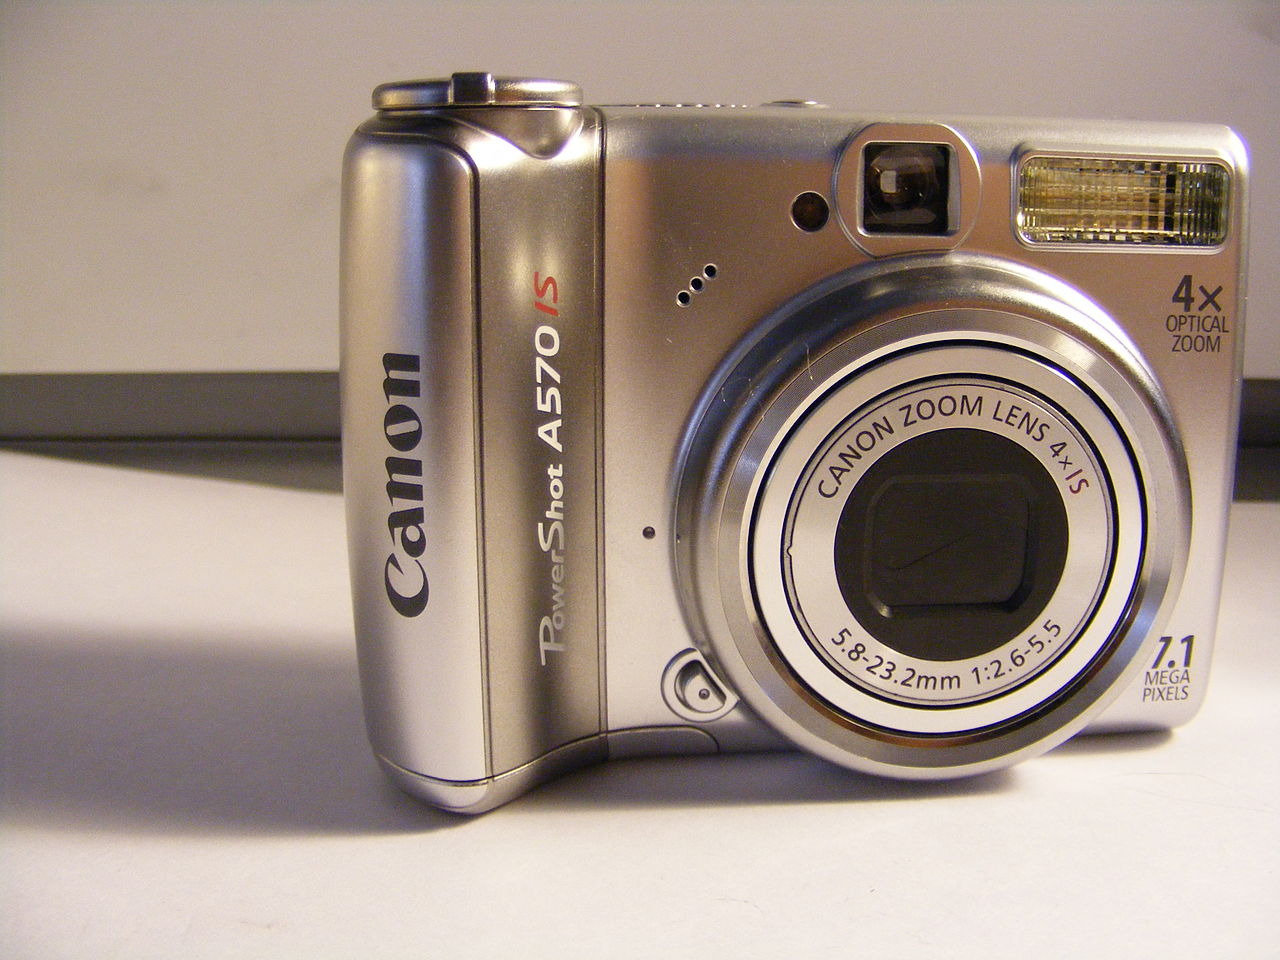 File:Canon powershot a570 is.jpg - Wikimedia Commons